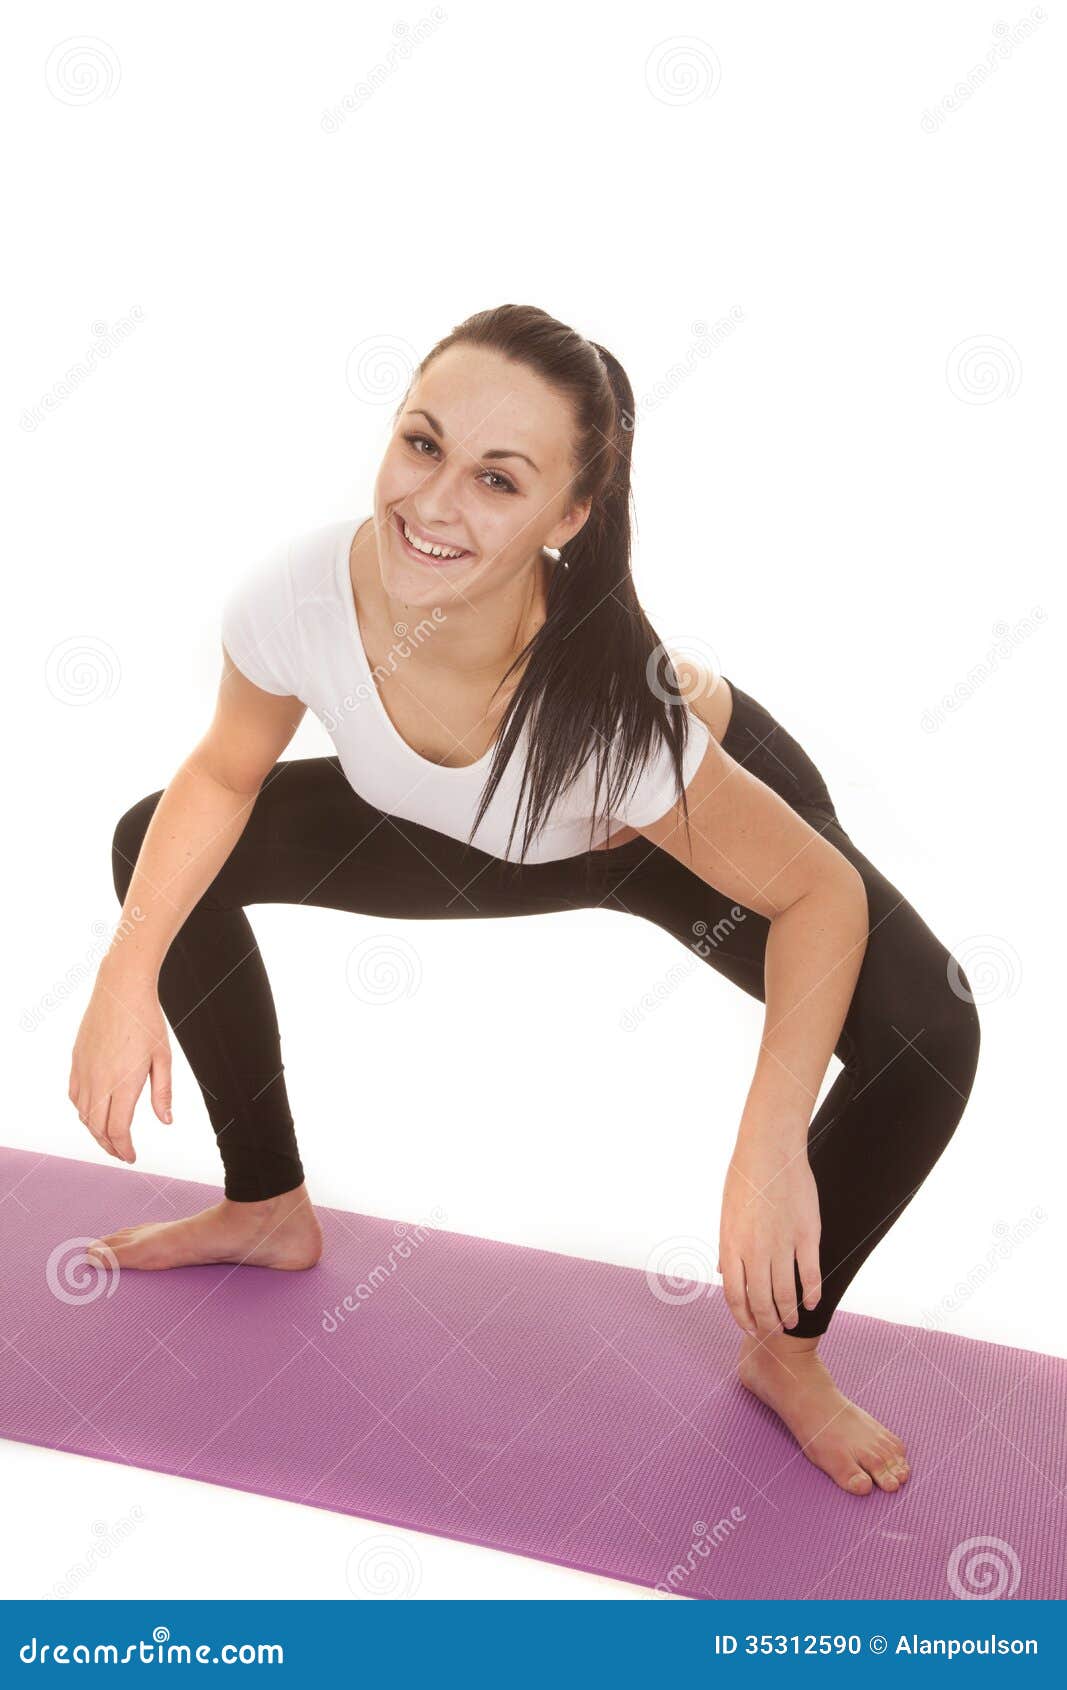 Woman fitness squat smile stock photo. Image of expression - 35312590